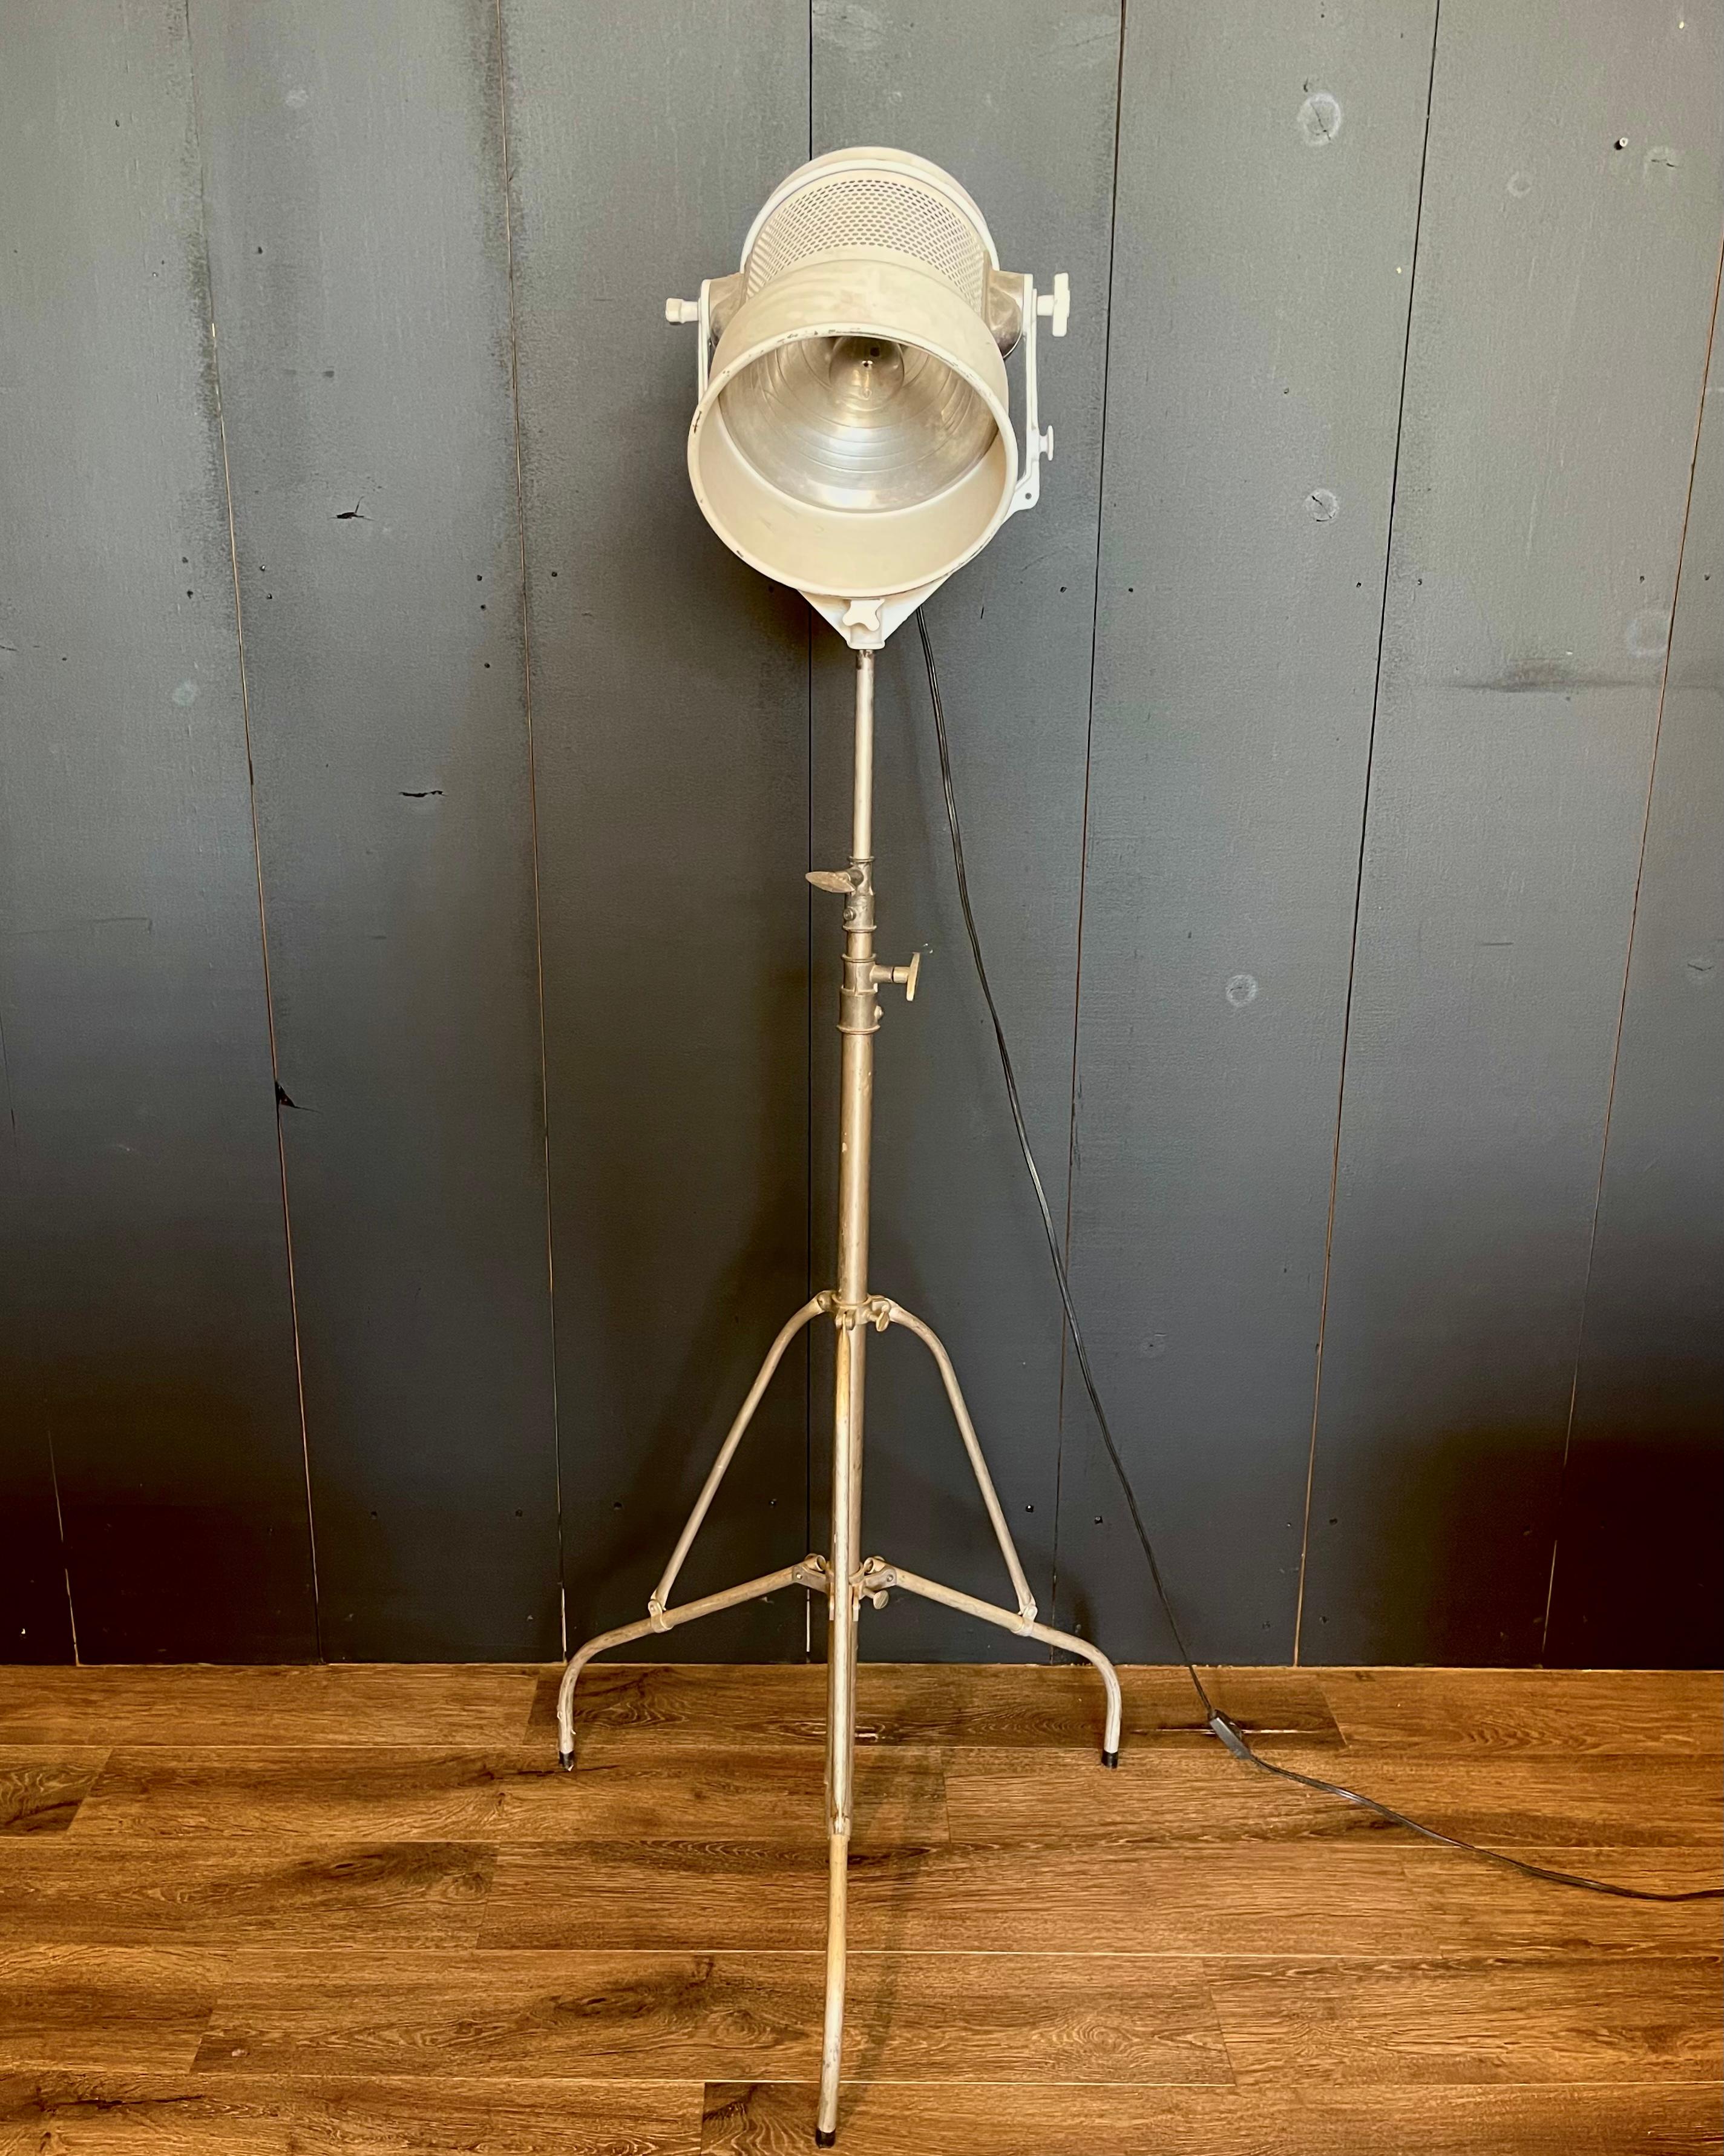 Experience the allure of classic cinema with the Mole Richardson Co industrial movie light floor lamp. Combining vintage charm and cinematic flair, illuminate your space with this stylish and functional piece.

Tripod base extends to 24” width left